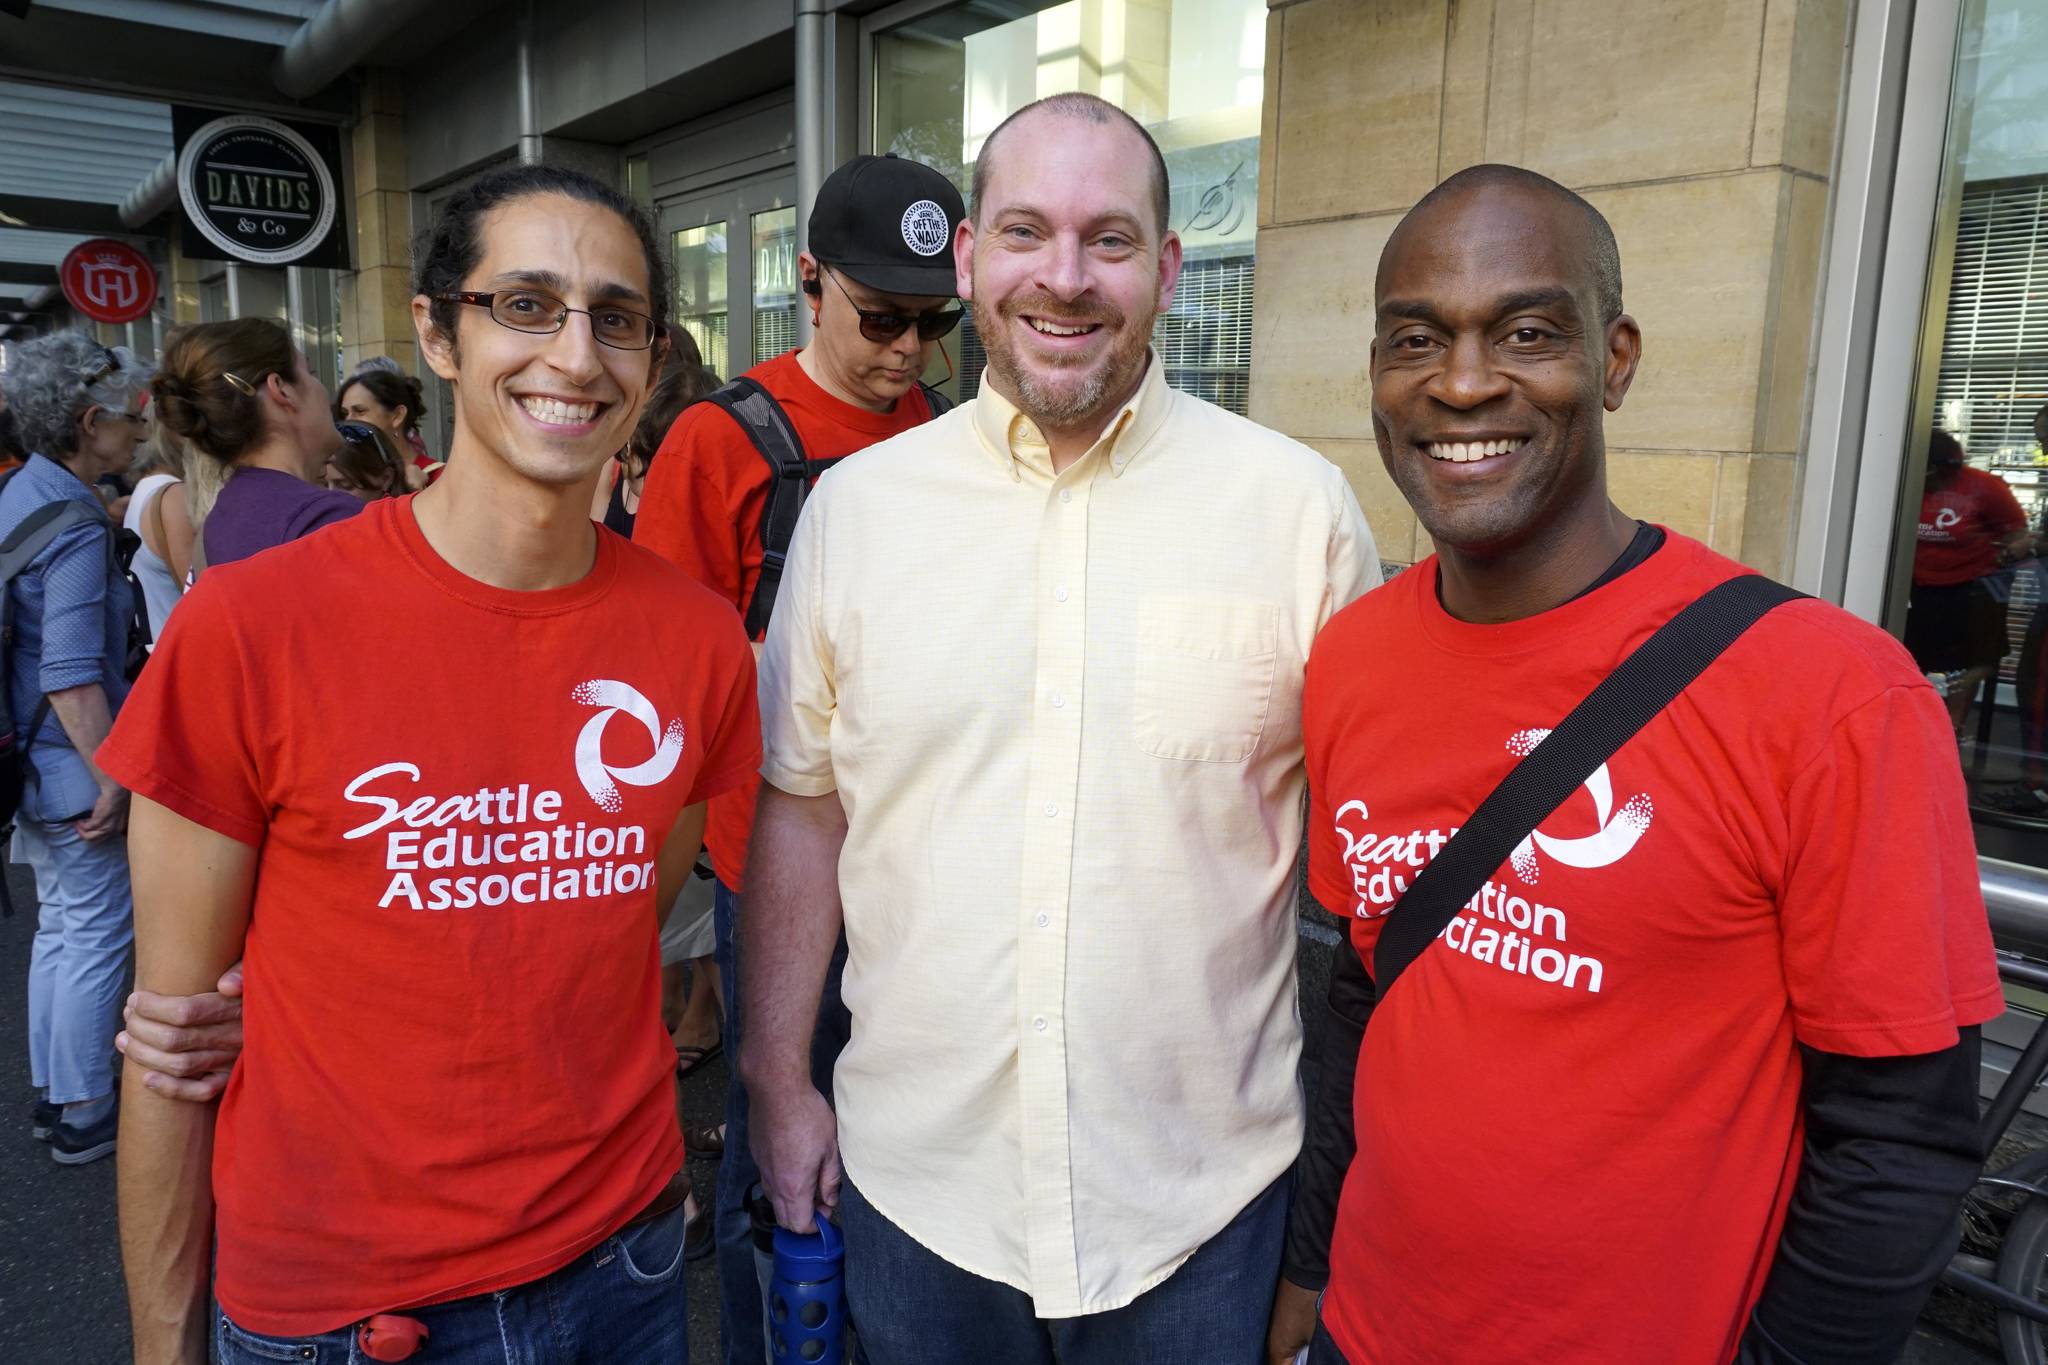 Greg DiGiacomo, Judson Kane, and Darryl James (left to right) attend a Seattle Education Association meeting at Benaroya Hall to vote for a strike authorization on Aug. 28, 2018. Photo by Melissa Hellmann